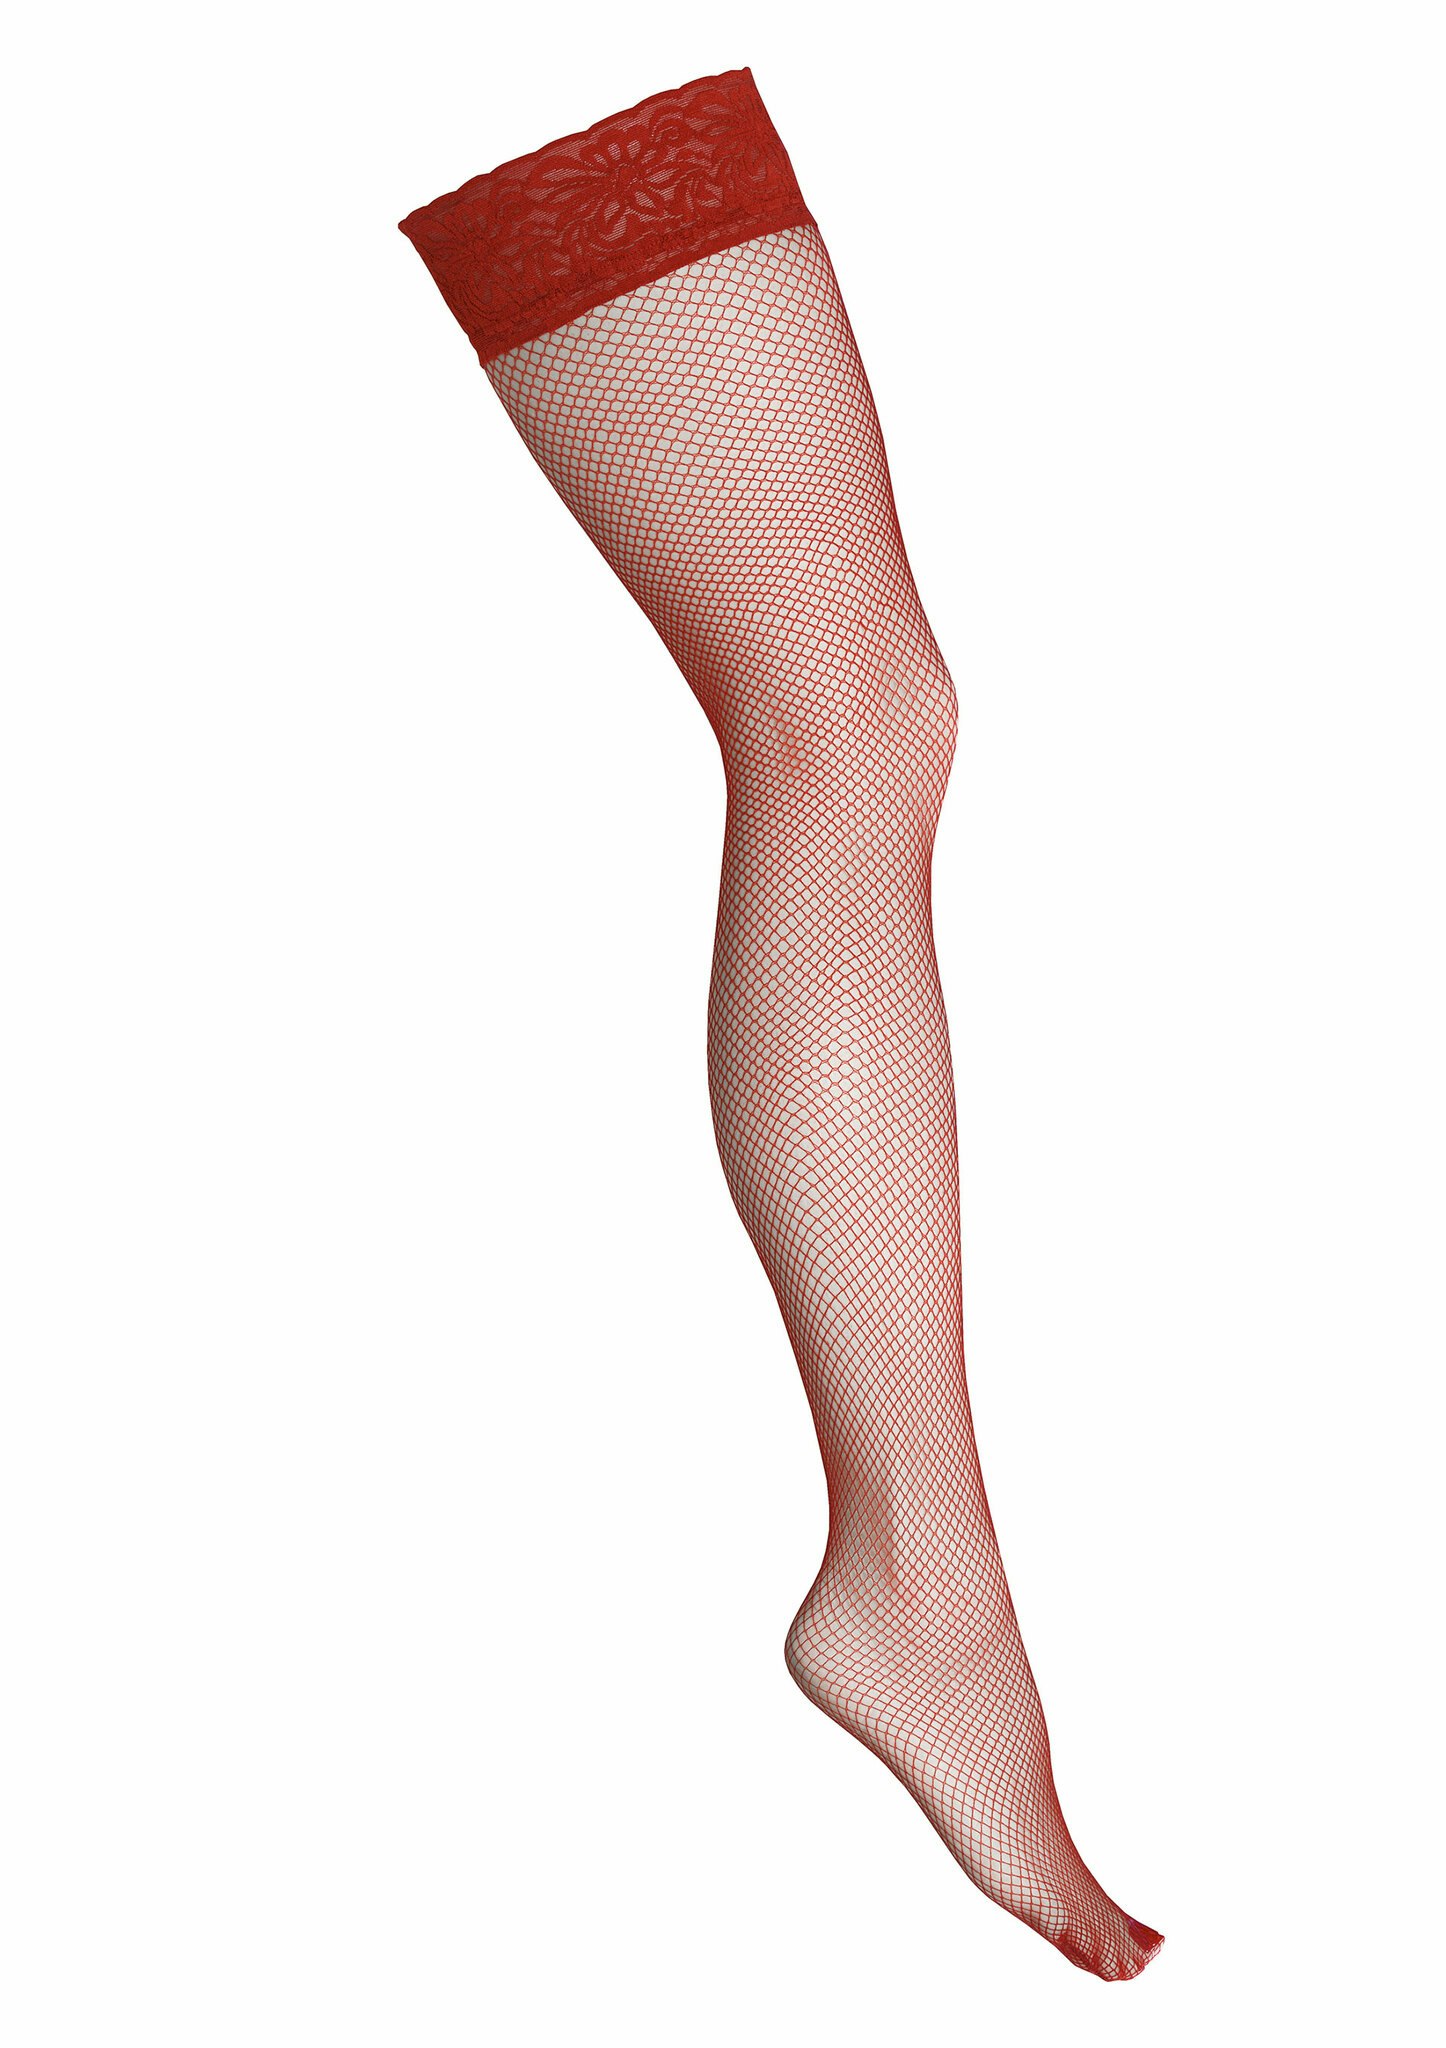 Fishnet hold ups with lace band with silicone, S/M, Dark red